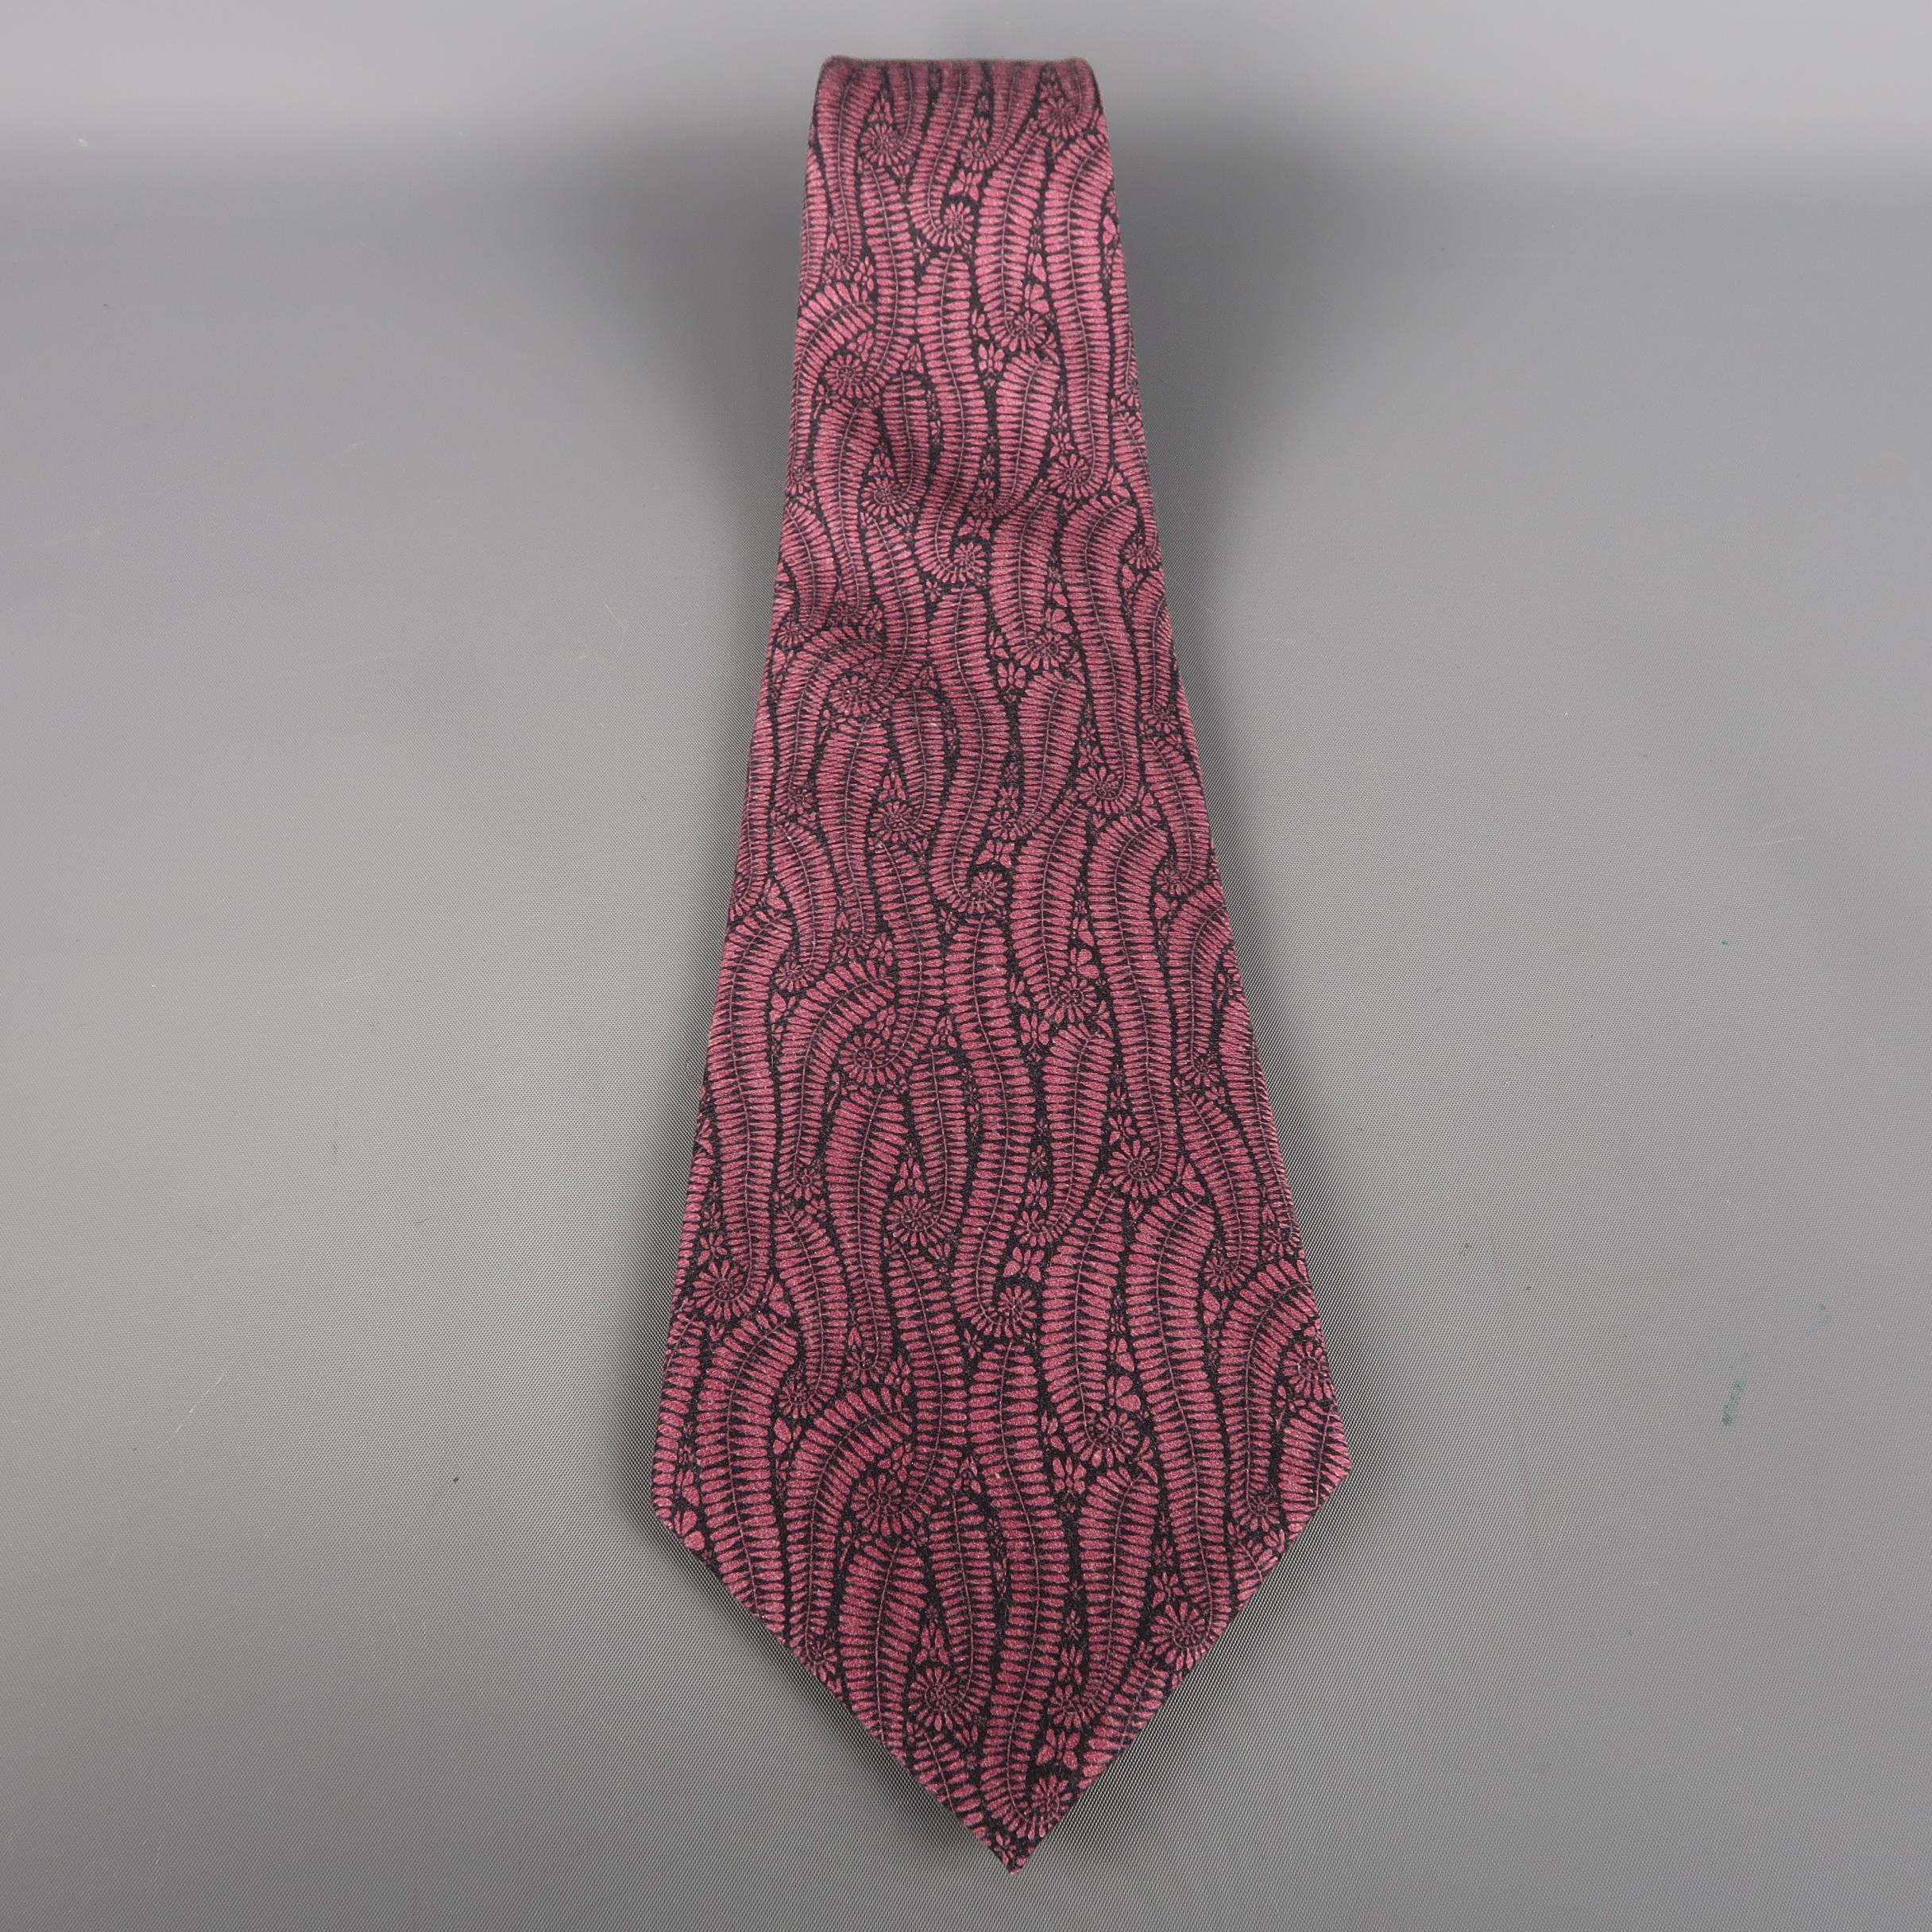 Wide printed neck tie by TOM FORD. This piece comes in a deep pink cashmere/silk blend with floral leaf branch pattern mimicking a paisley. Made in Italy.
 
Excellent Pre-Owned Condition.
 
Width: 5 in.